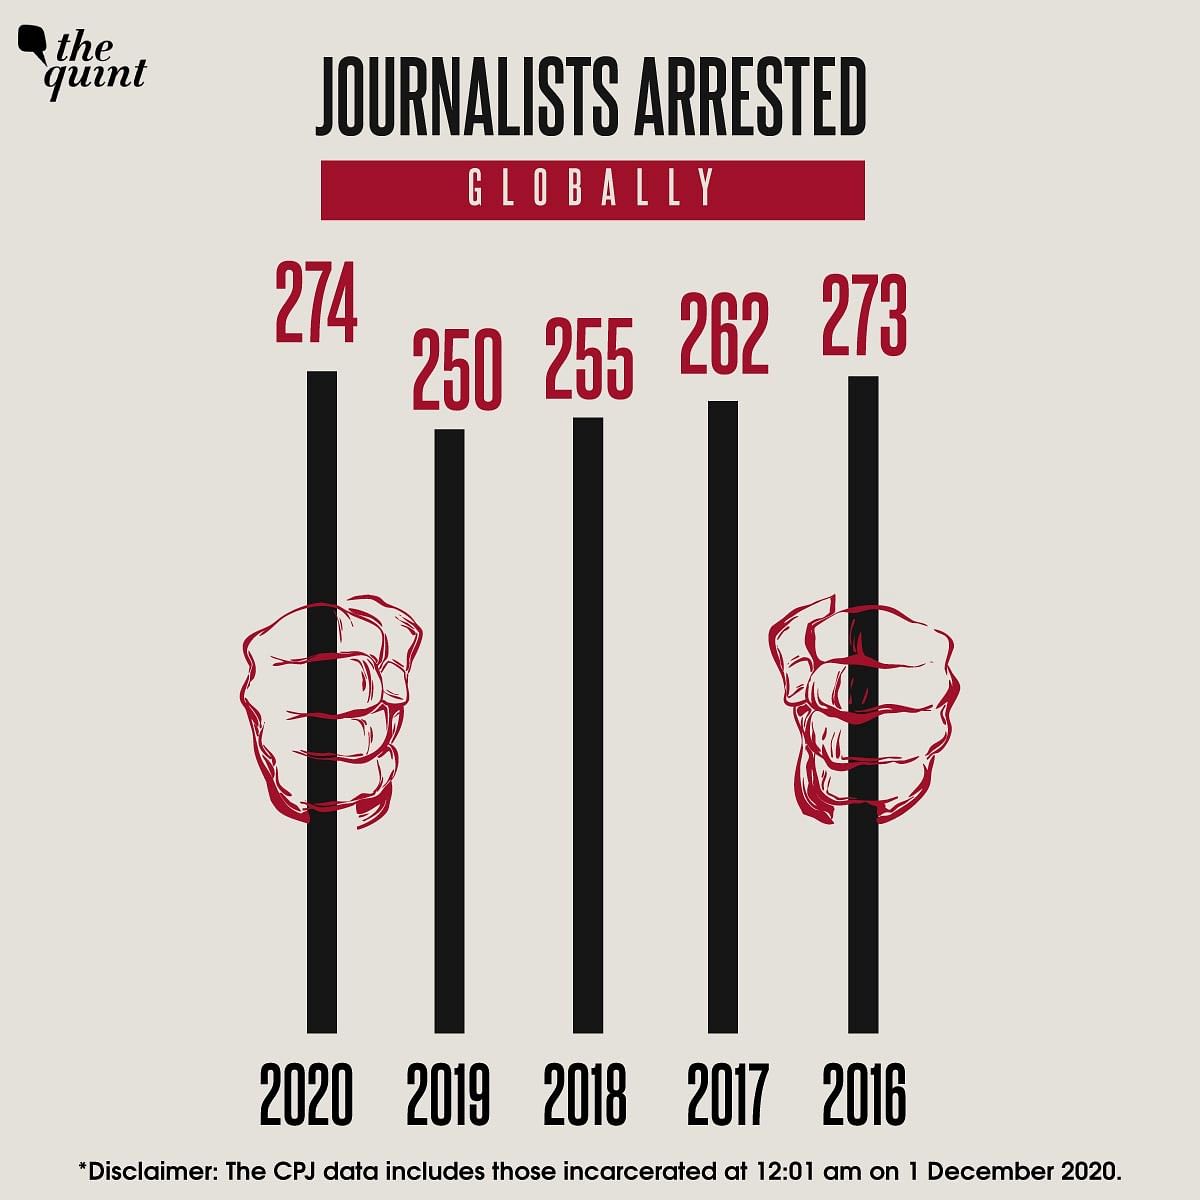 Those arrested include photojournalists, print media, radio, television, and digital media journalists.